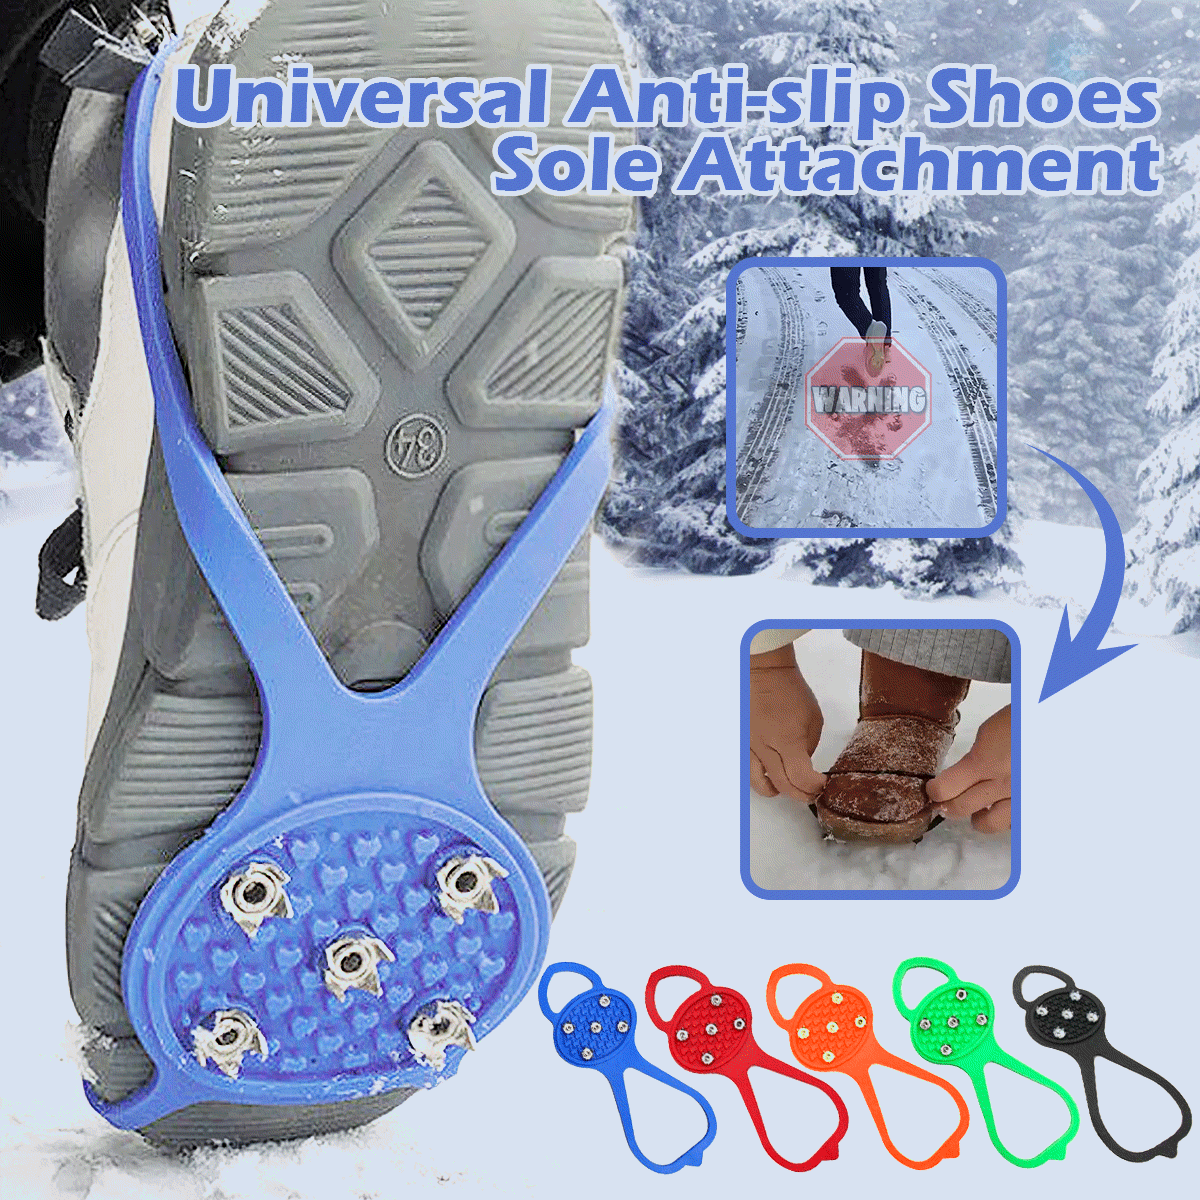 THIS IS A DISCOUNT FOR YOU - Universal Anti-slip Shoes Sole Attachment